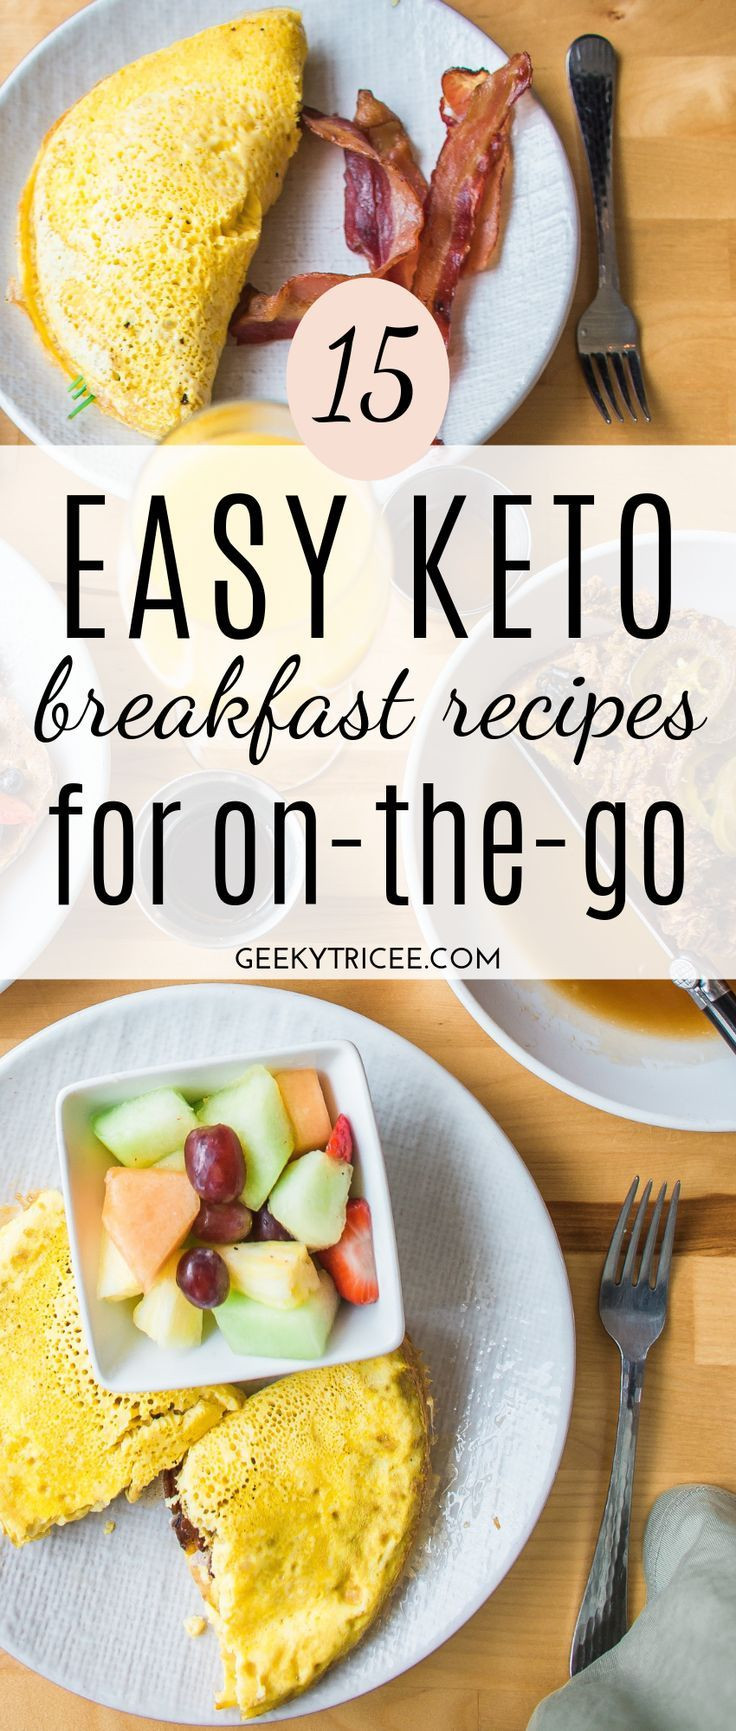 Clean Keto Breakfast On The Go
 15 keto breakfast recipes for those on the go mornings